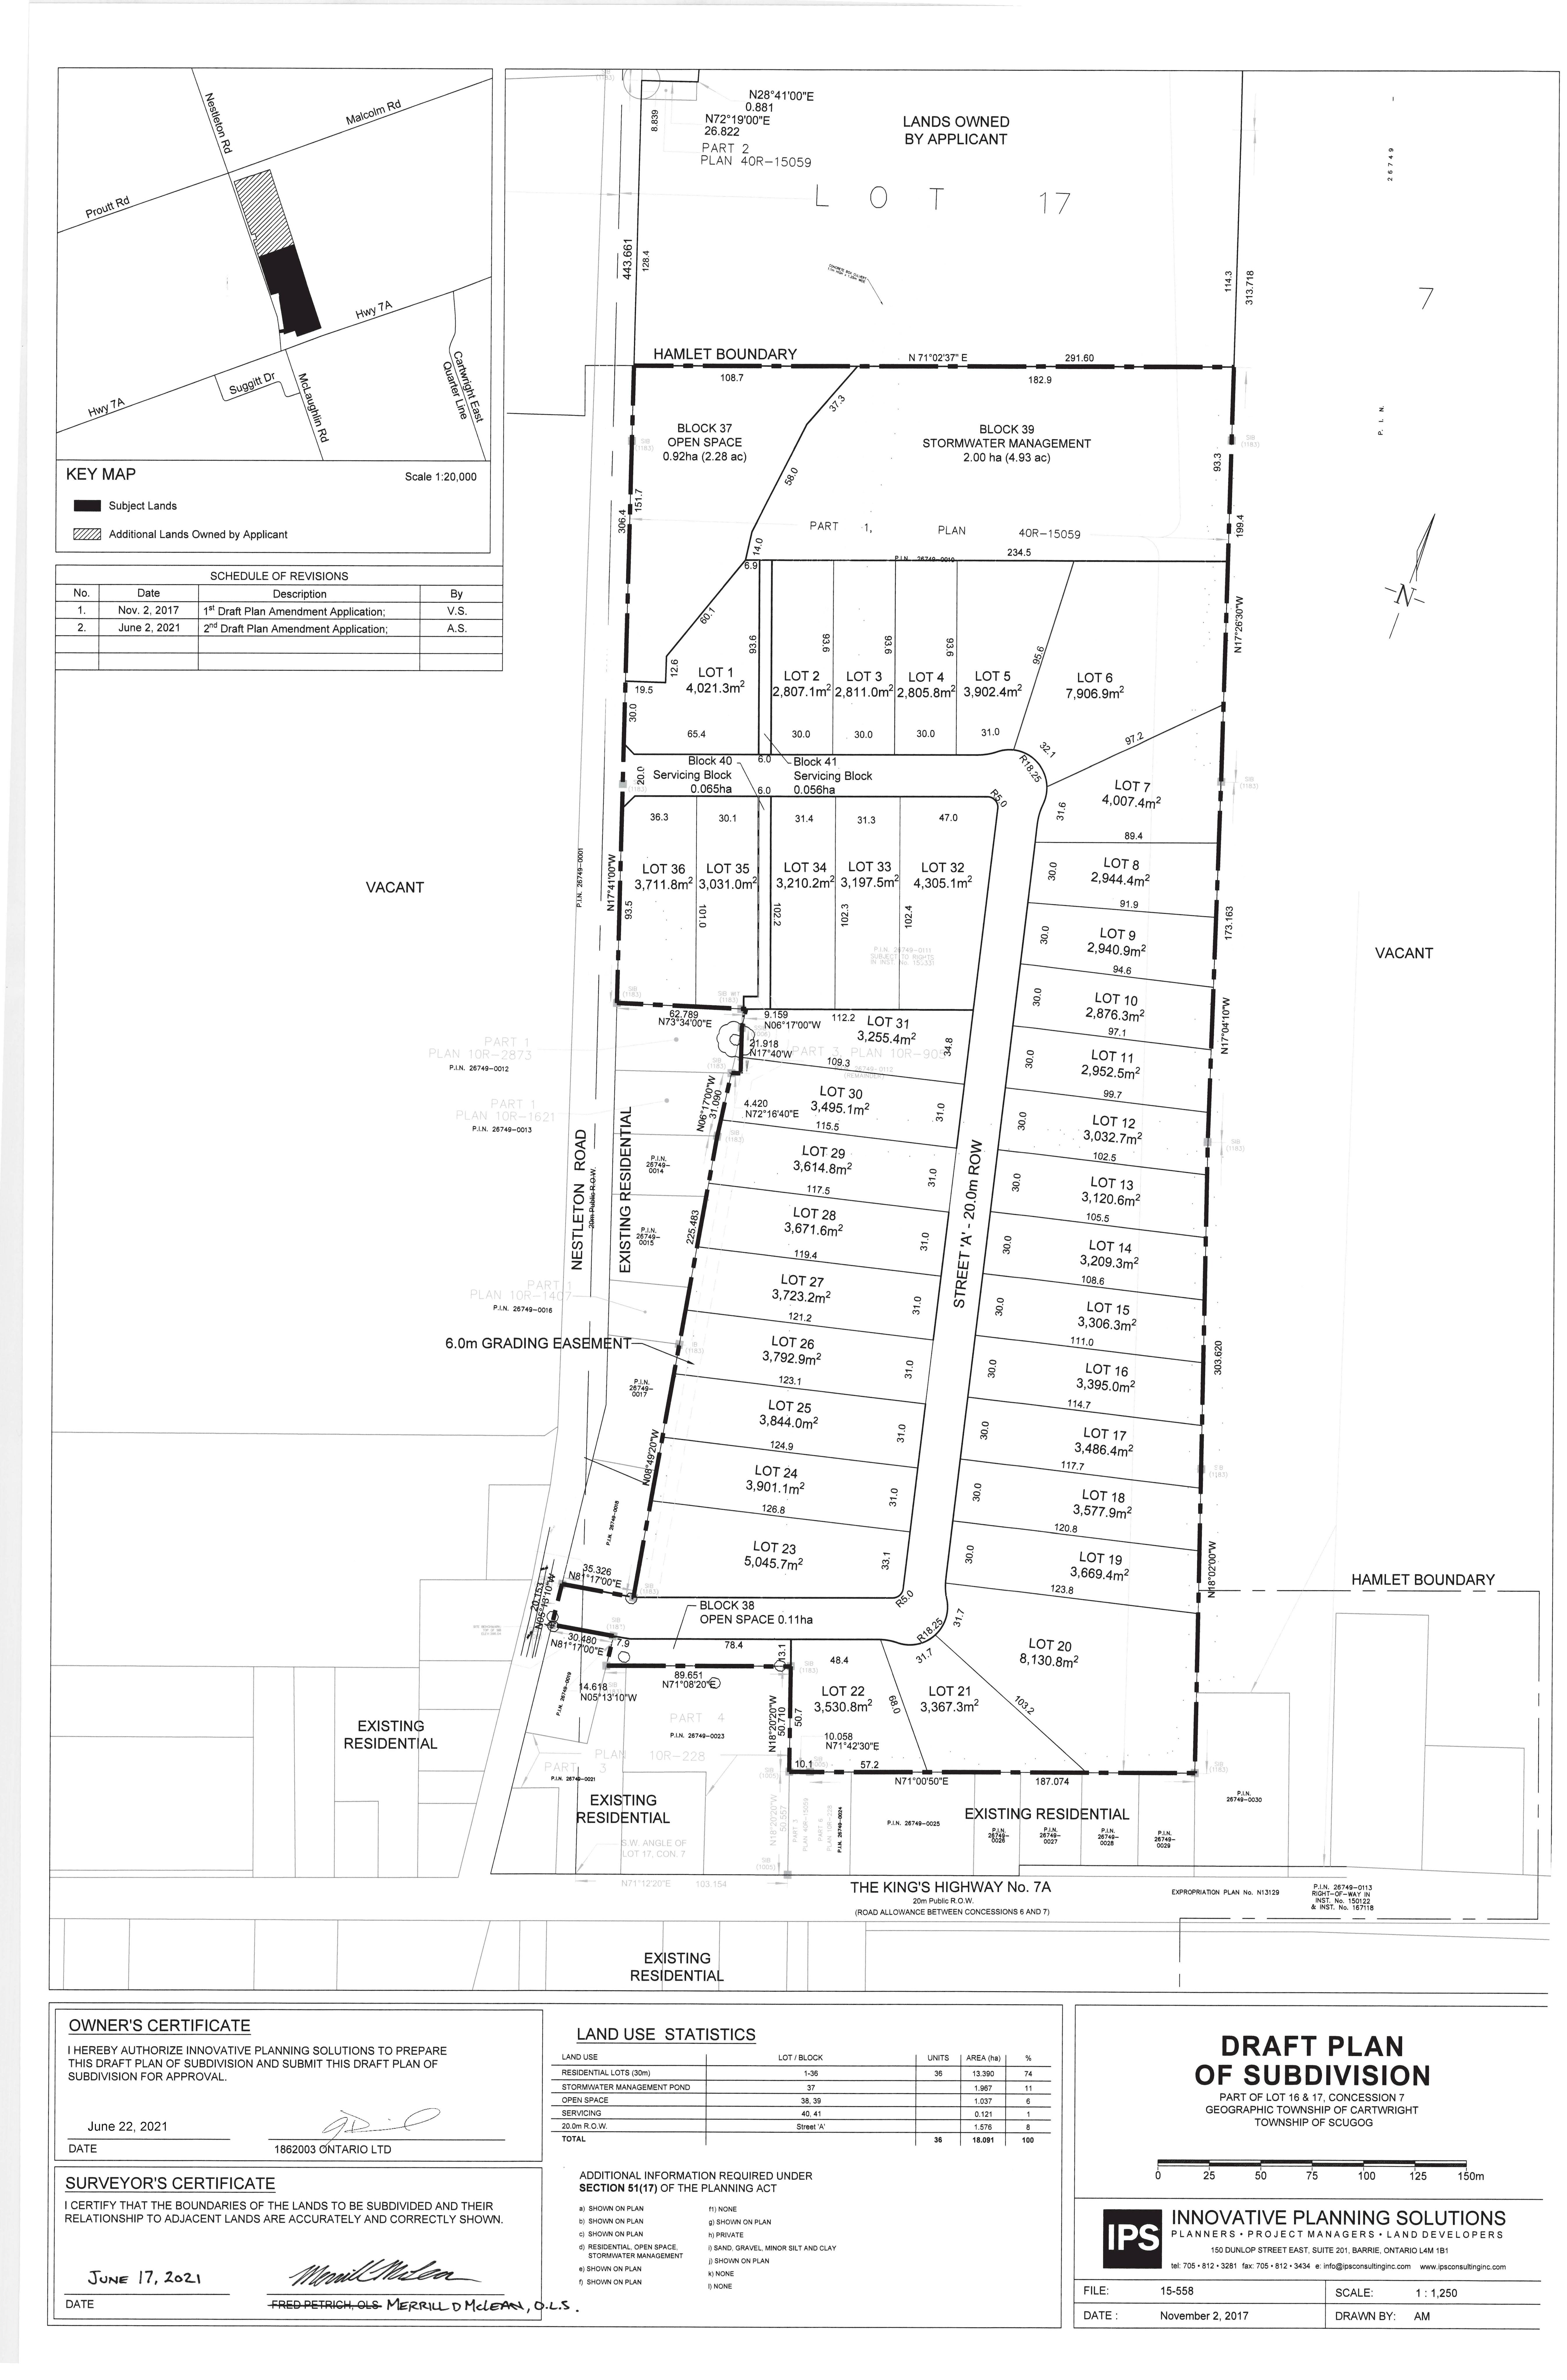 Proposed Plan of Subdivision